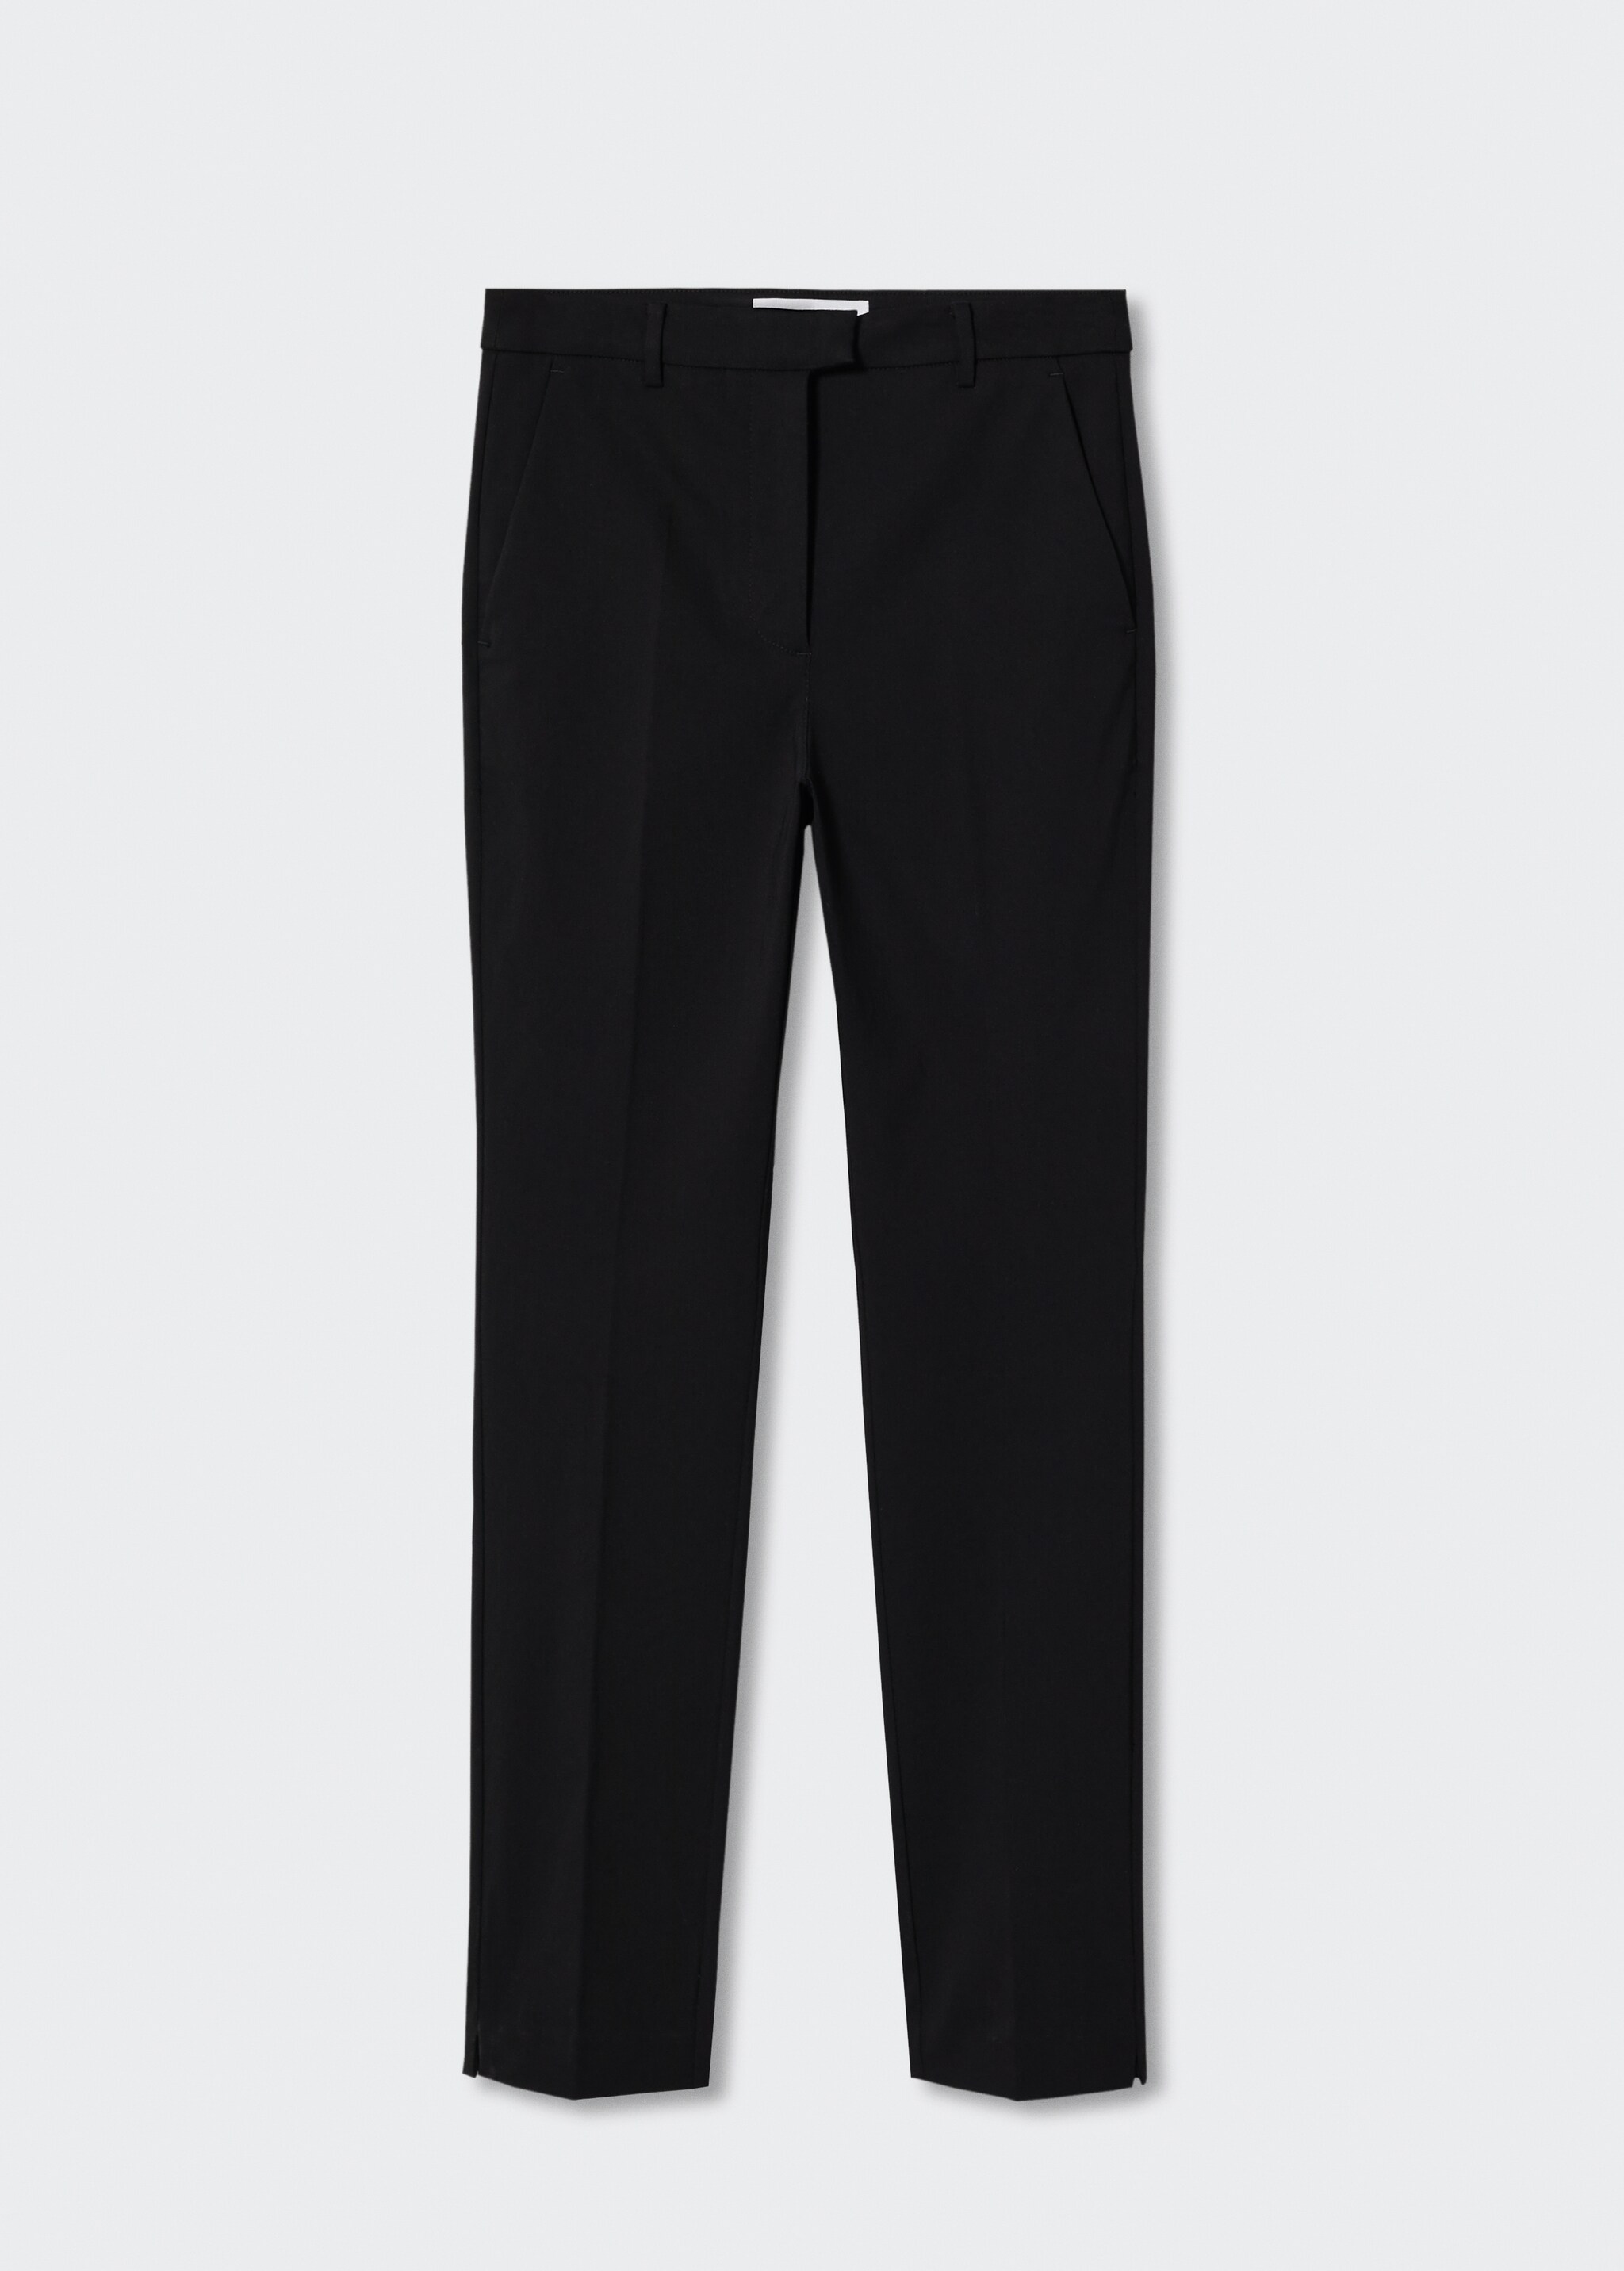 Crop skinny trousers - Article without model